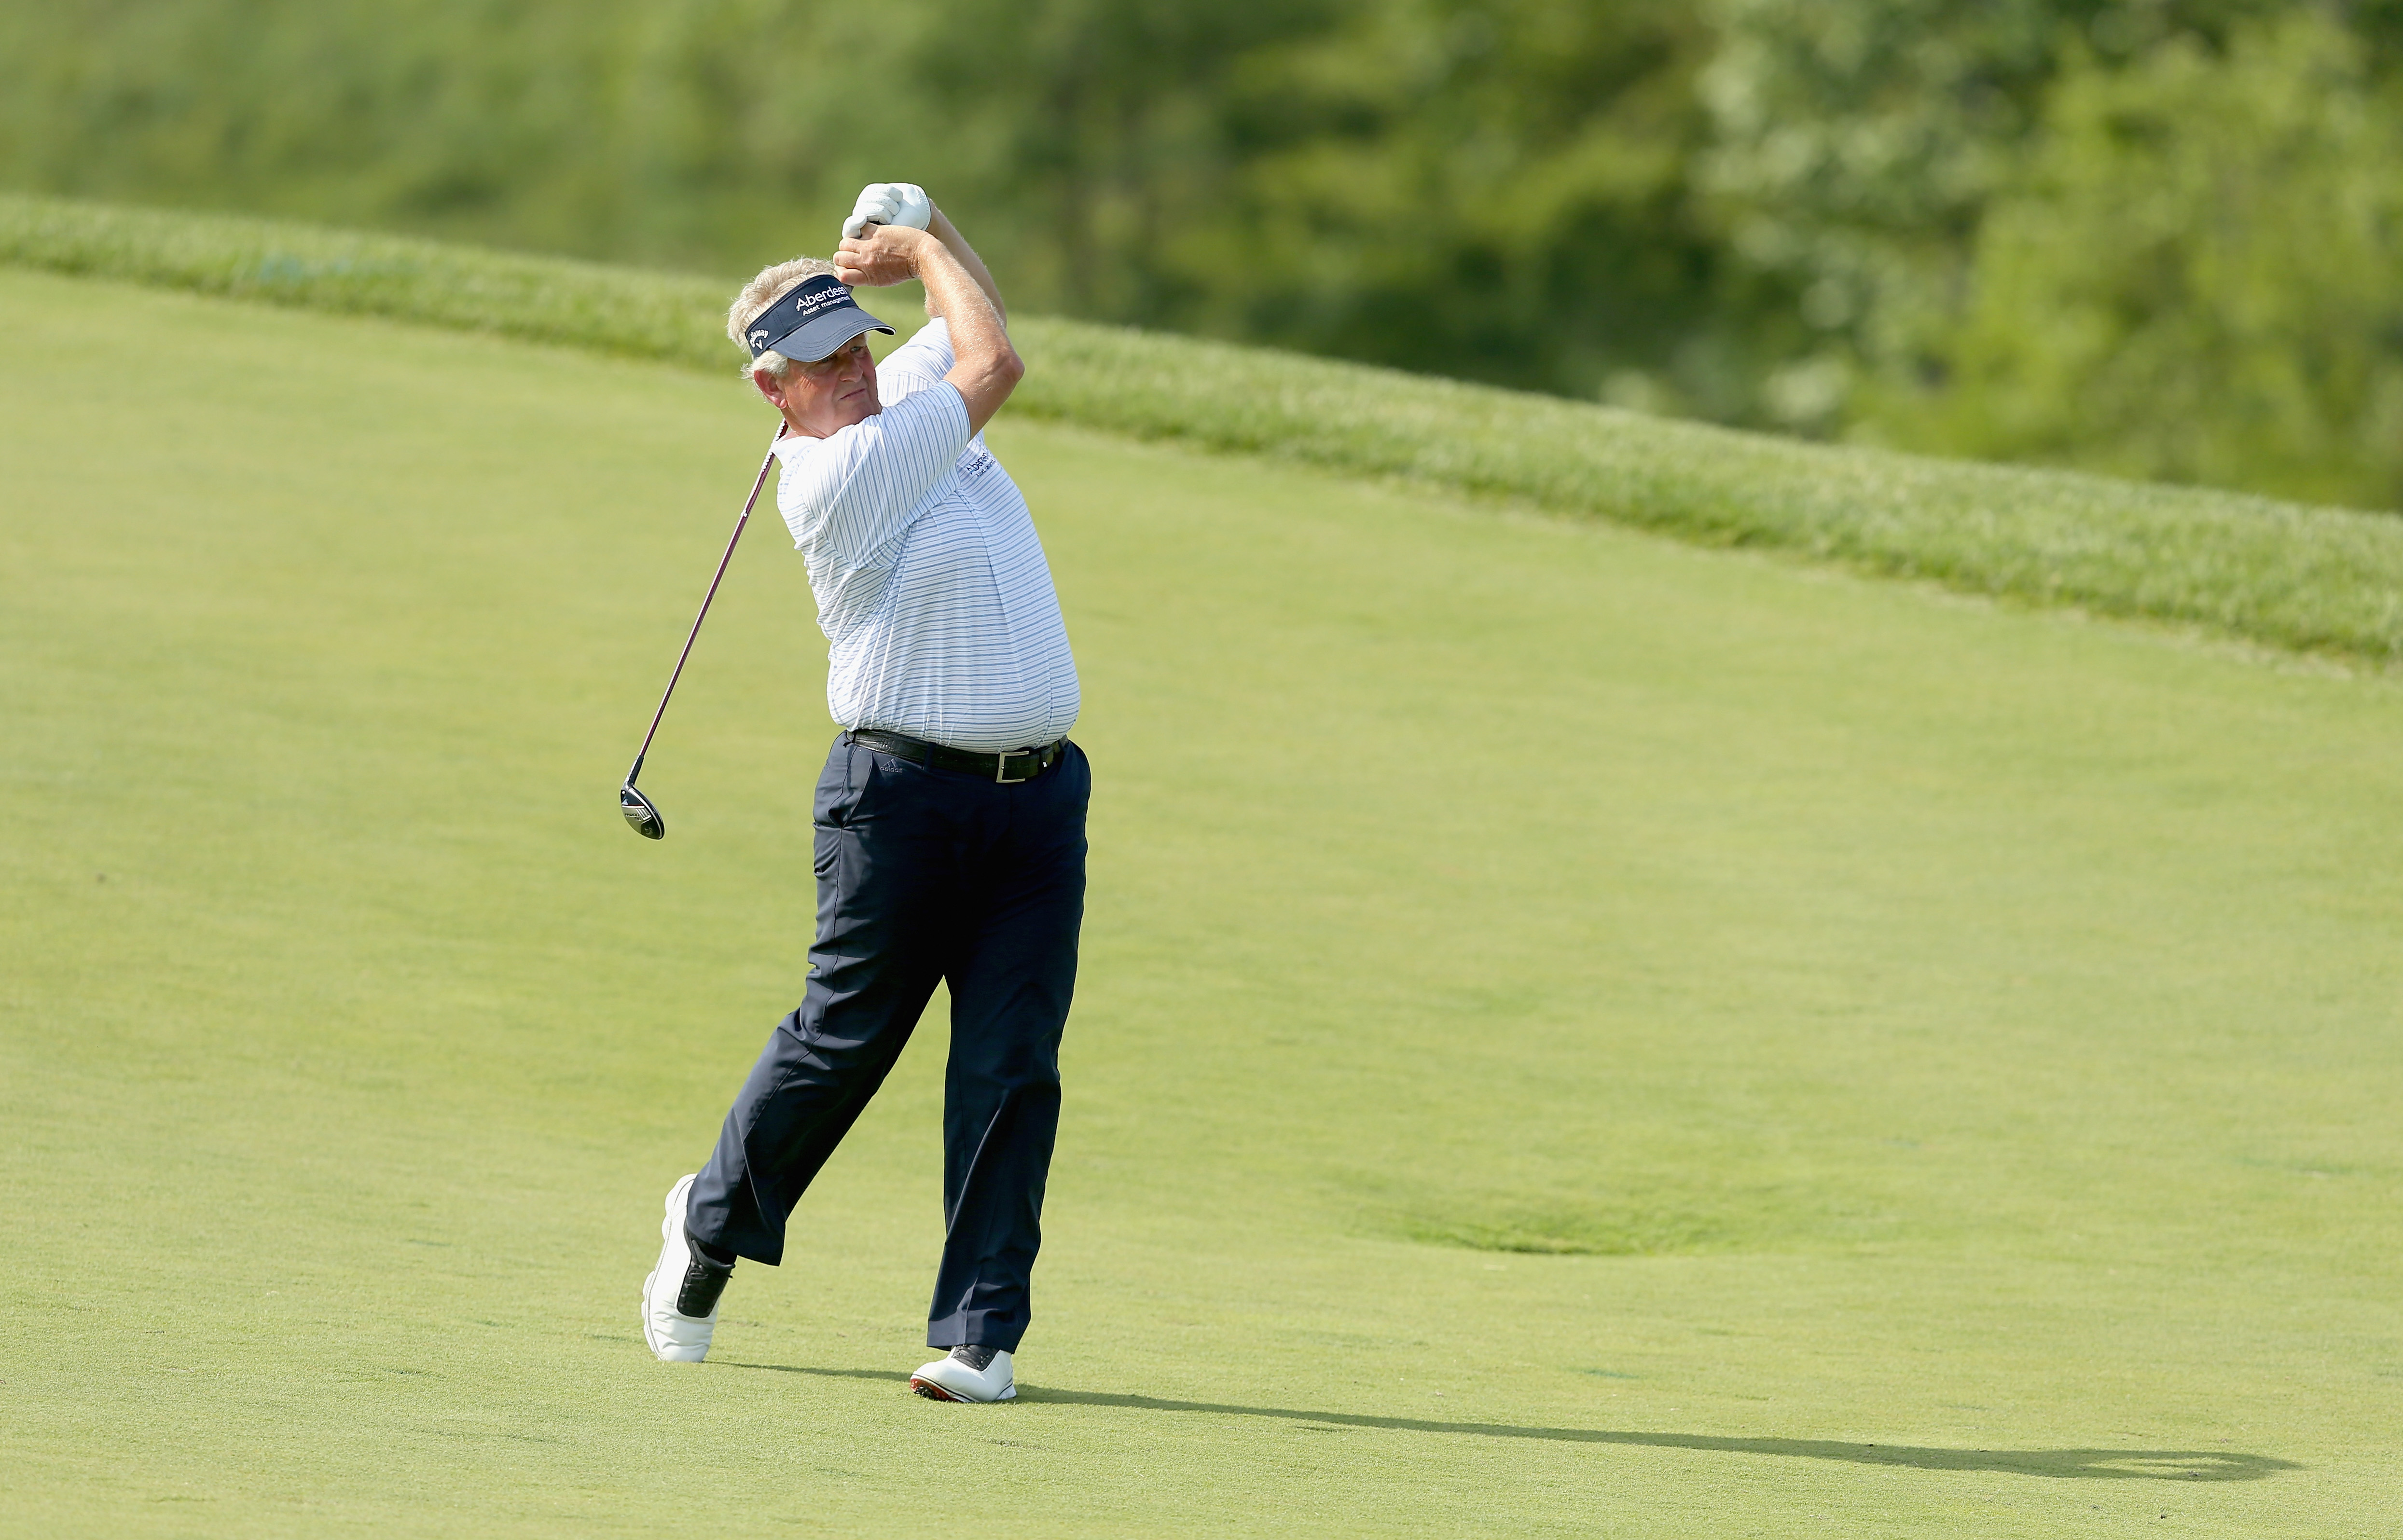 Montgomerie is bigging himself up despite the greens (Photo: Getty Images)